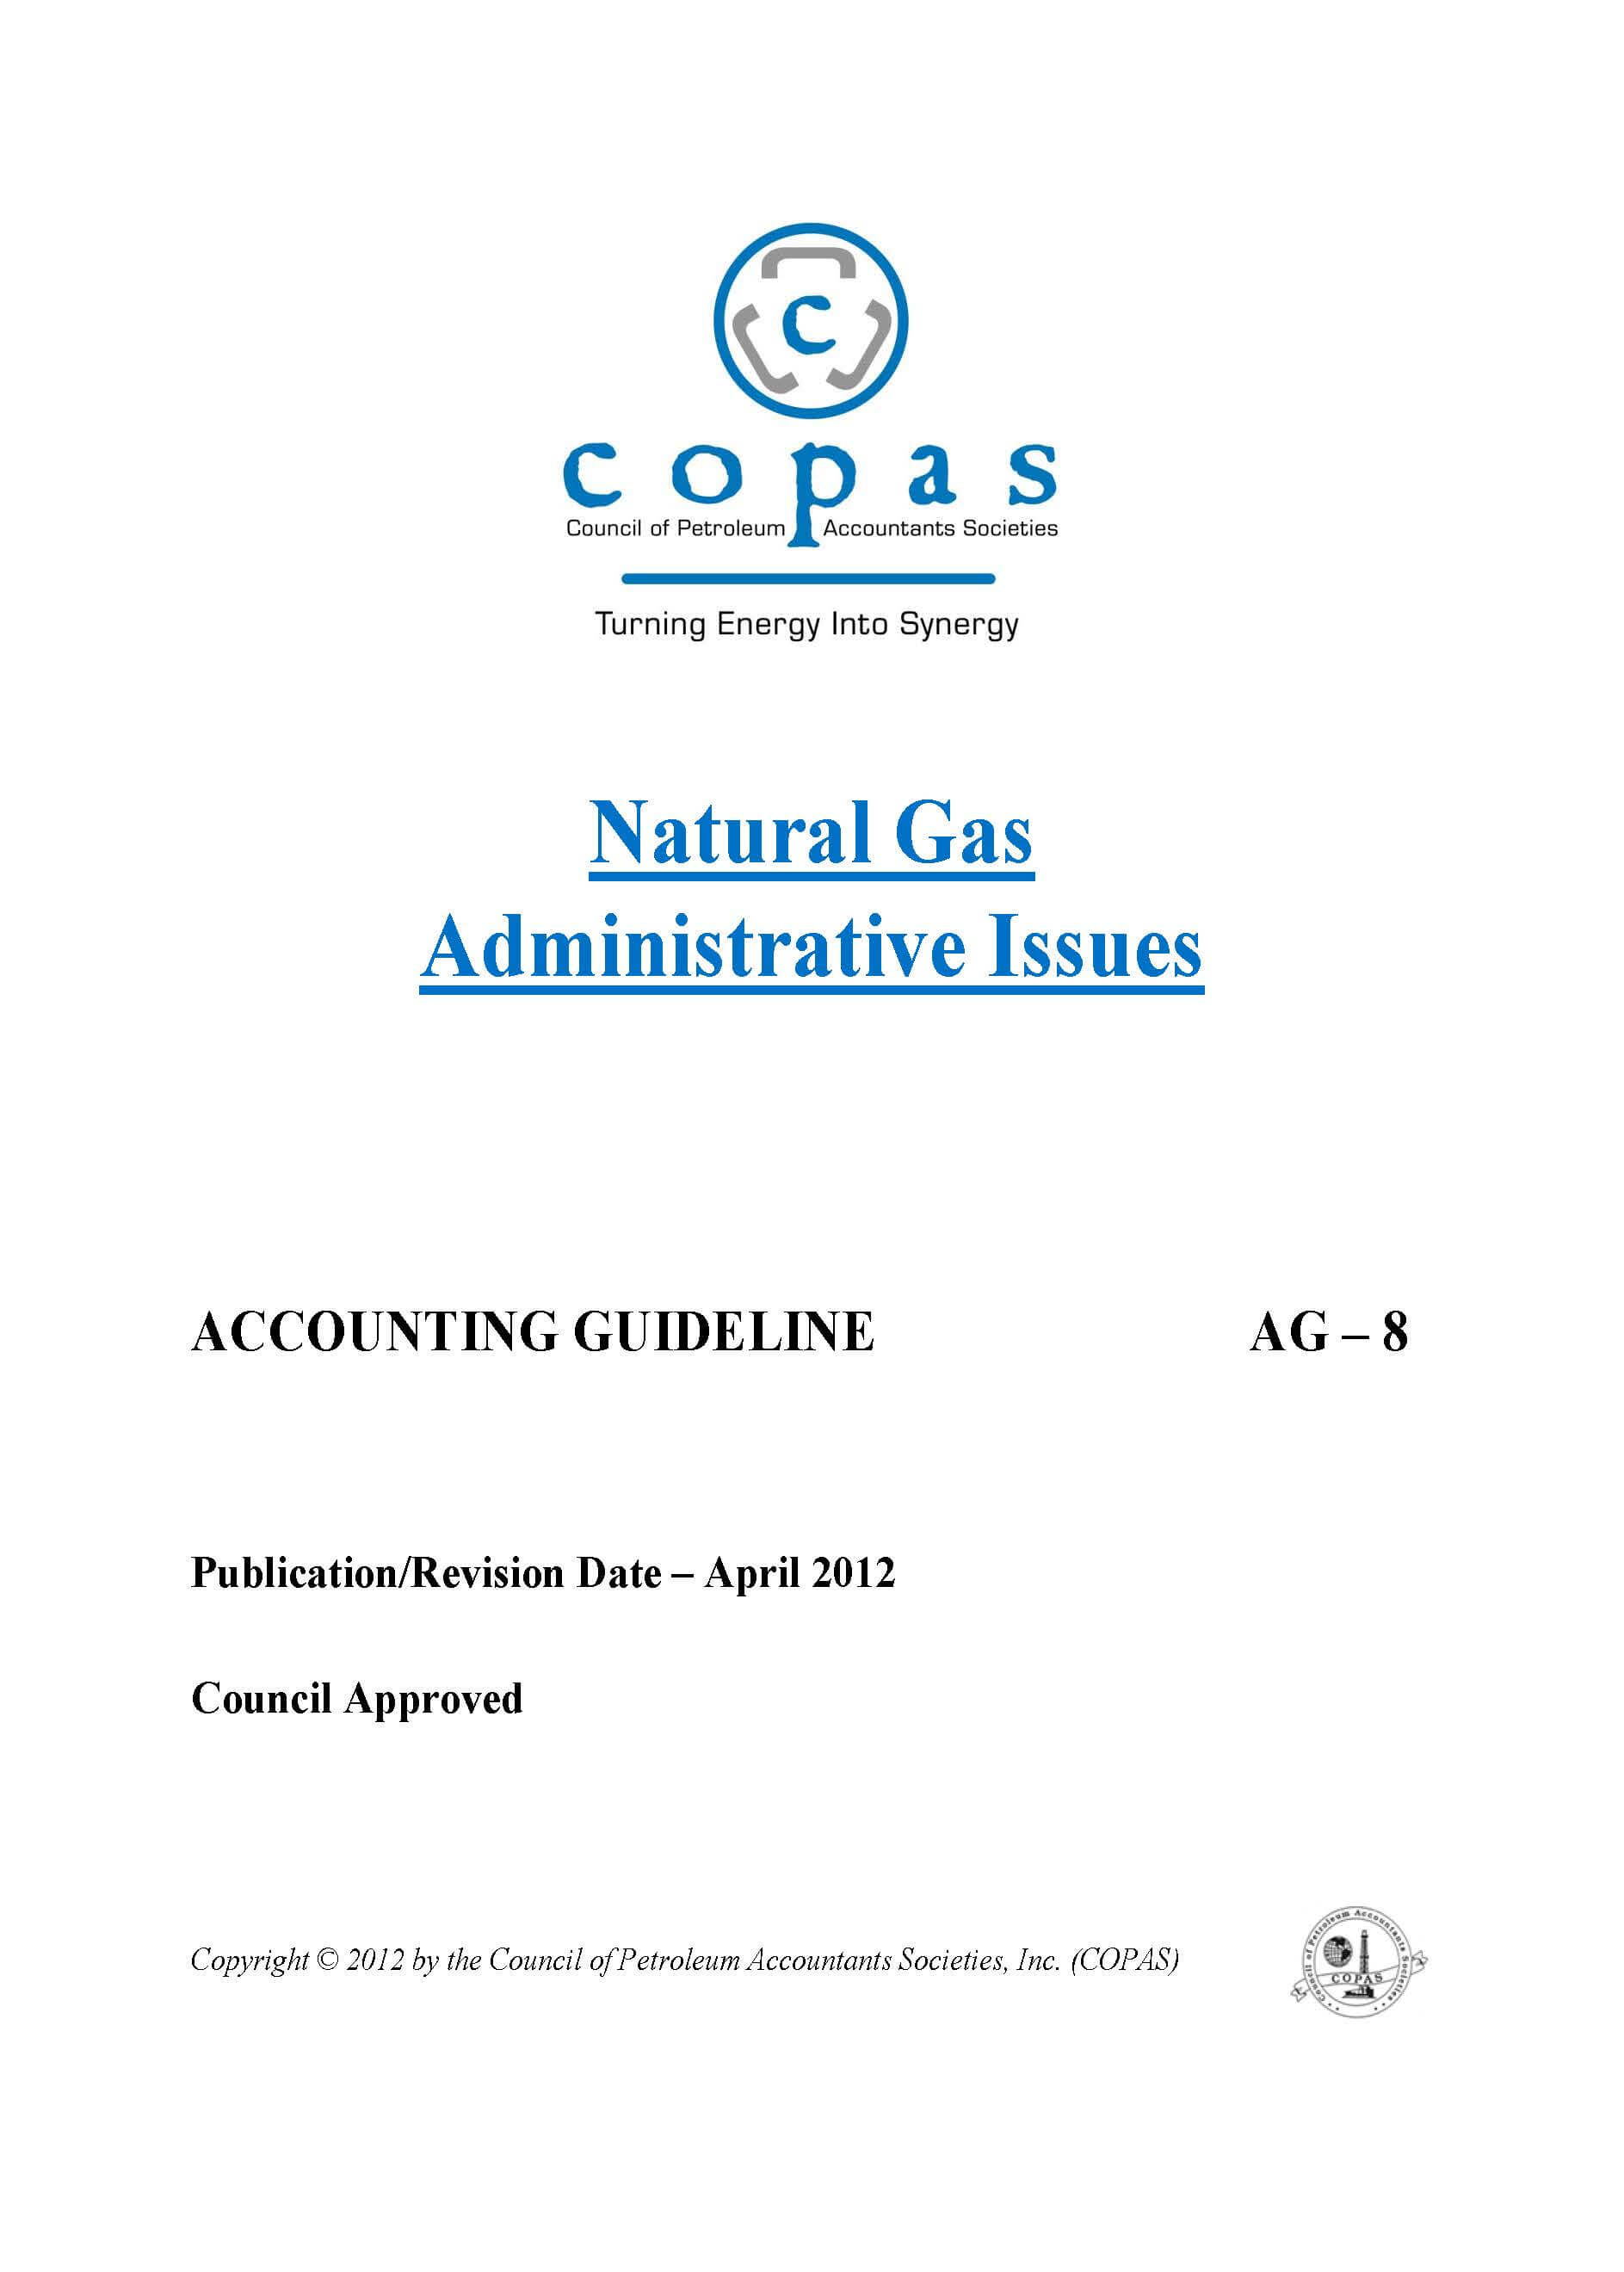 AG-8 Natural Gas Administrative Issues - products AG 8 Natural Gas Administrative Issues - Council of Petroleum Accountants Societies